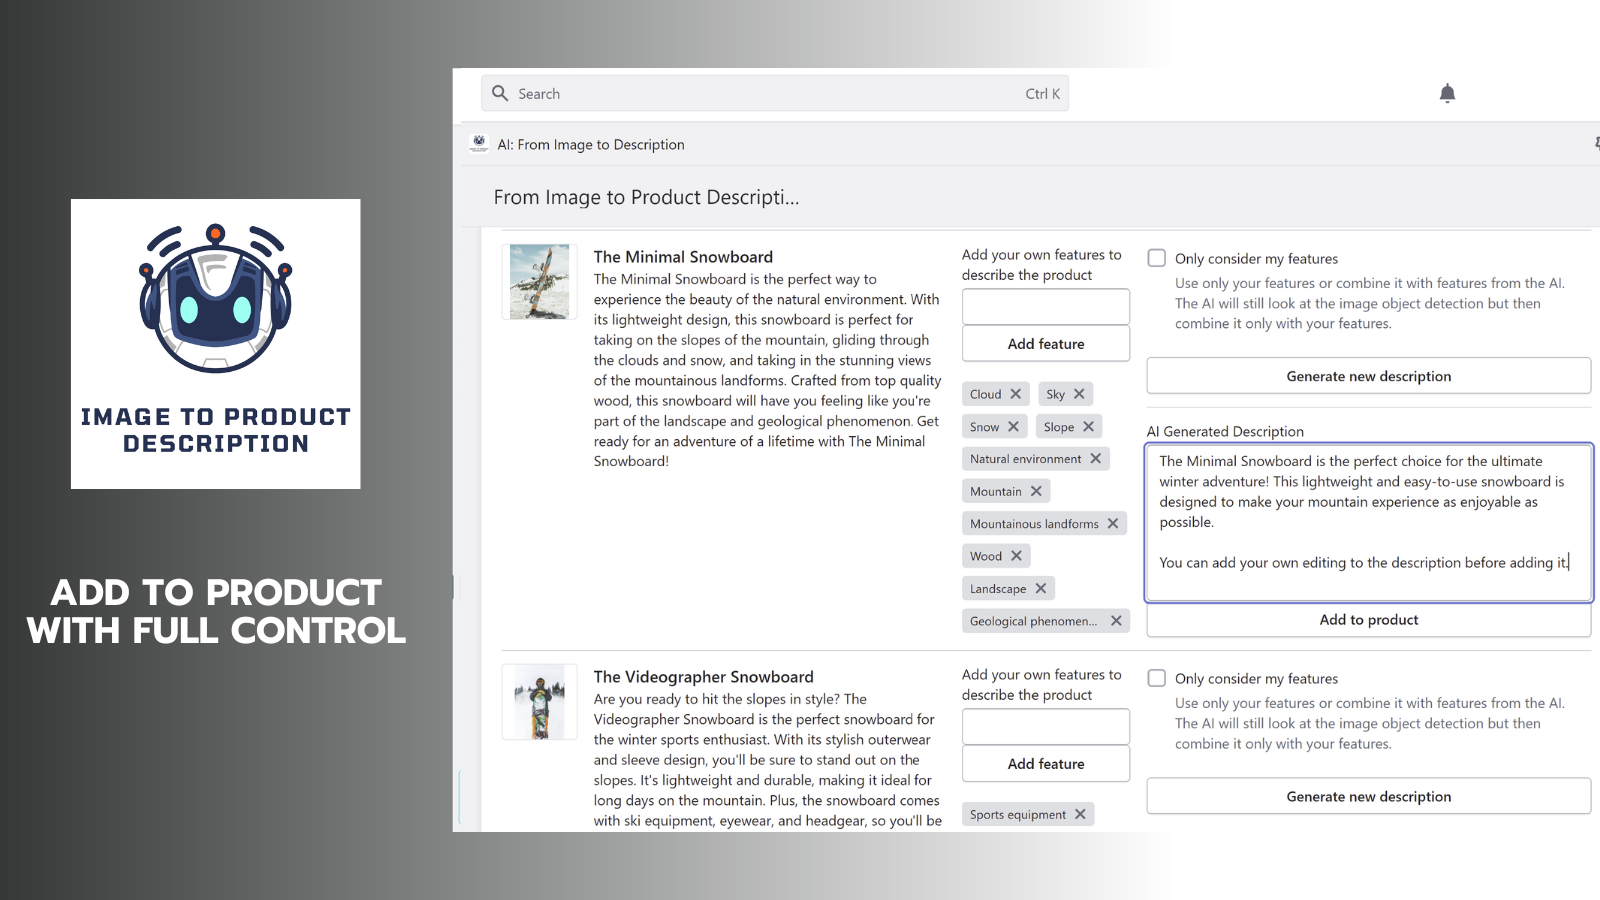 Keep full control on when to update product descriptions